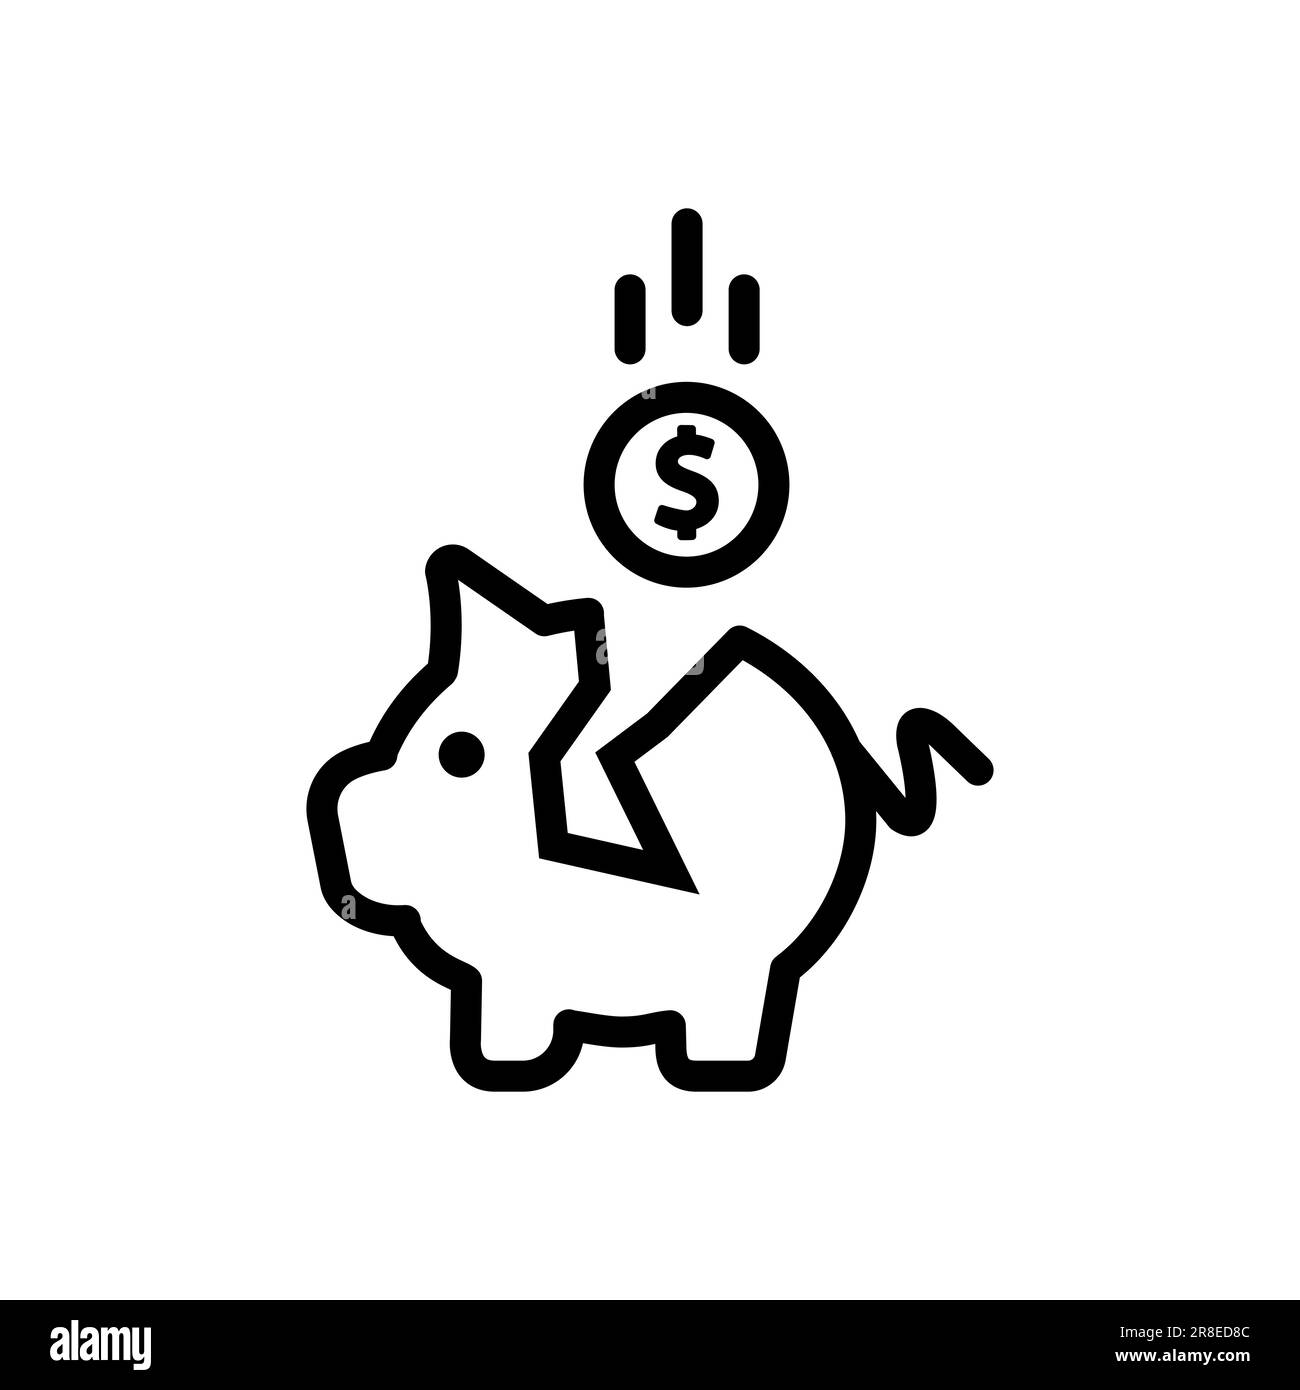 Piggy bank icon vector illustration isolated on white background. Saving flat pig stock illustration outline silhouette Stock Vector